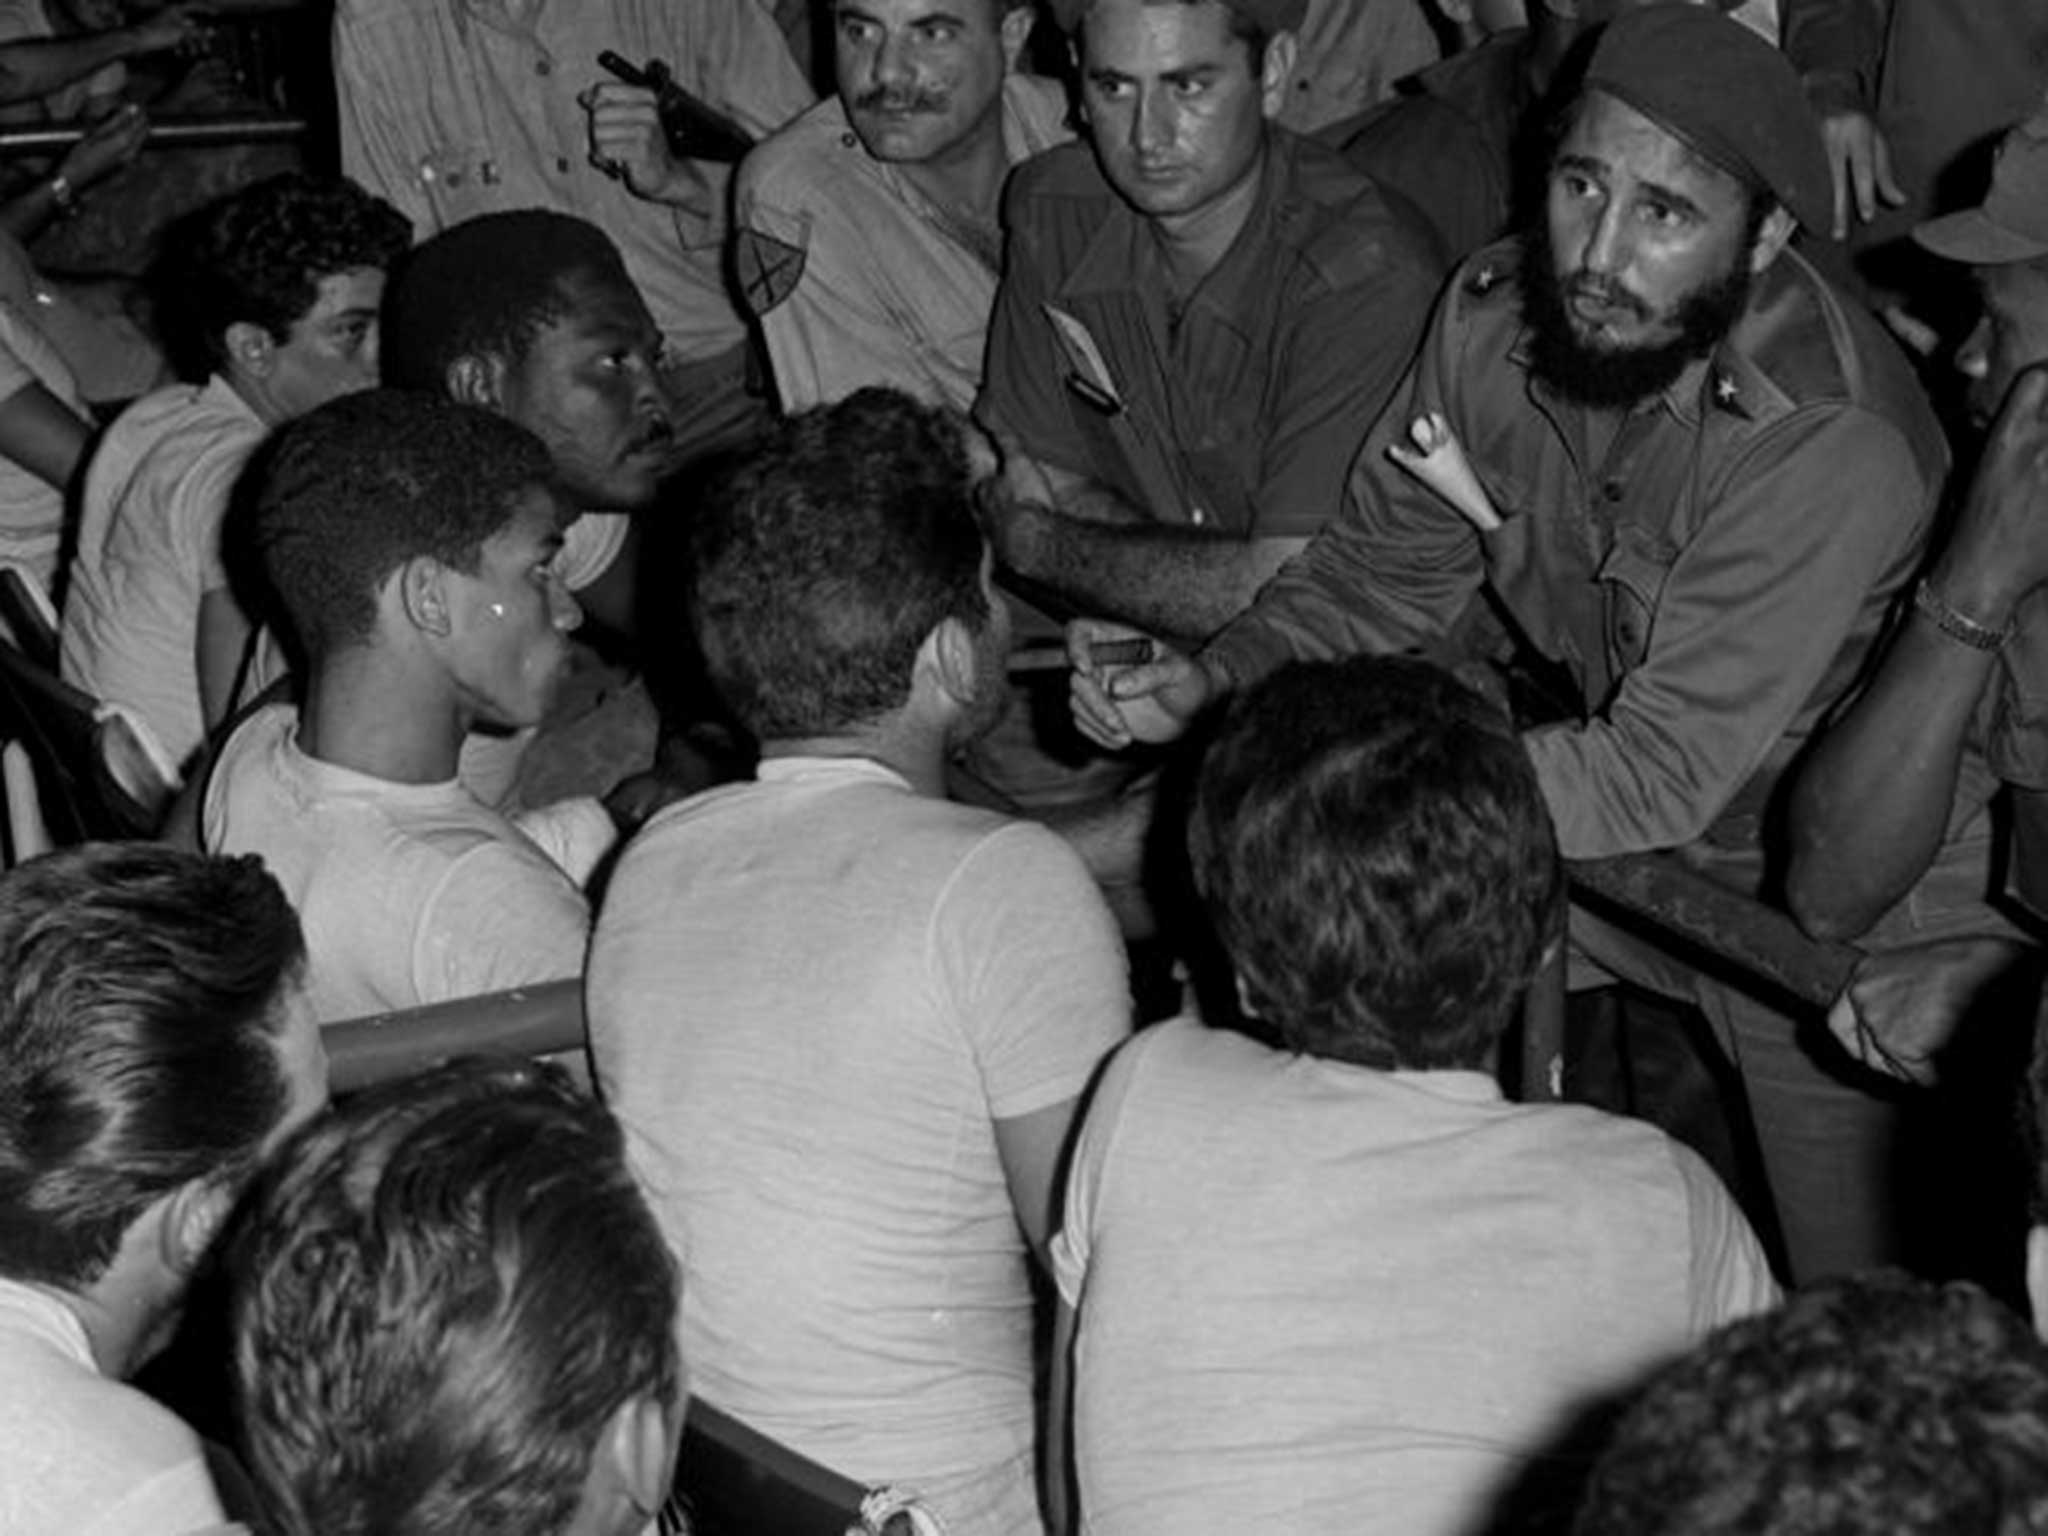 Fidel Castro speaks with prisoners from the Bay of Pigs invasion at the sports stadium in Havana, Cuba